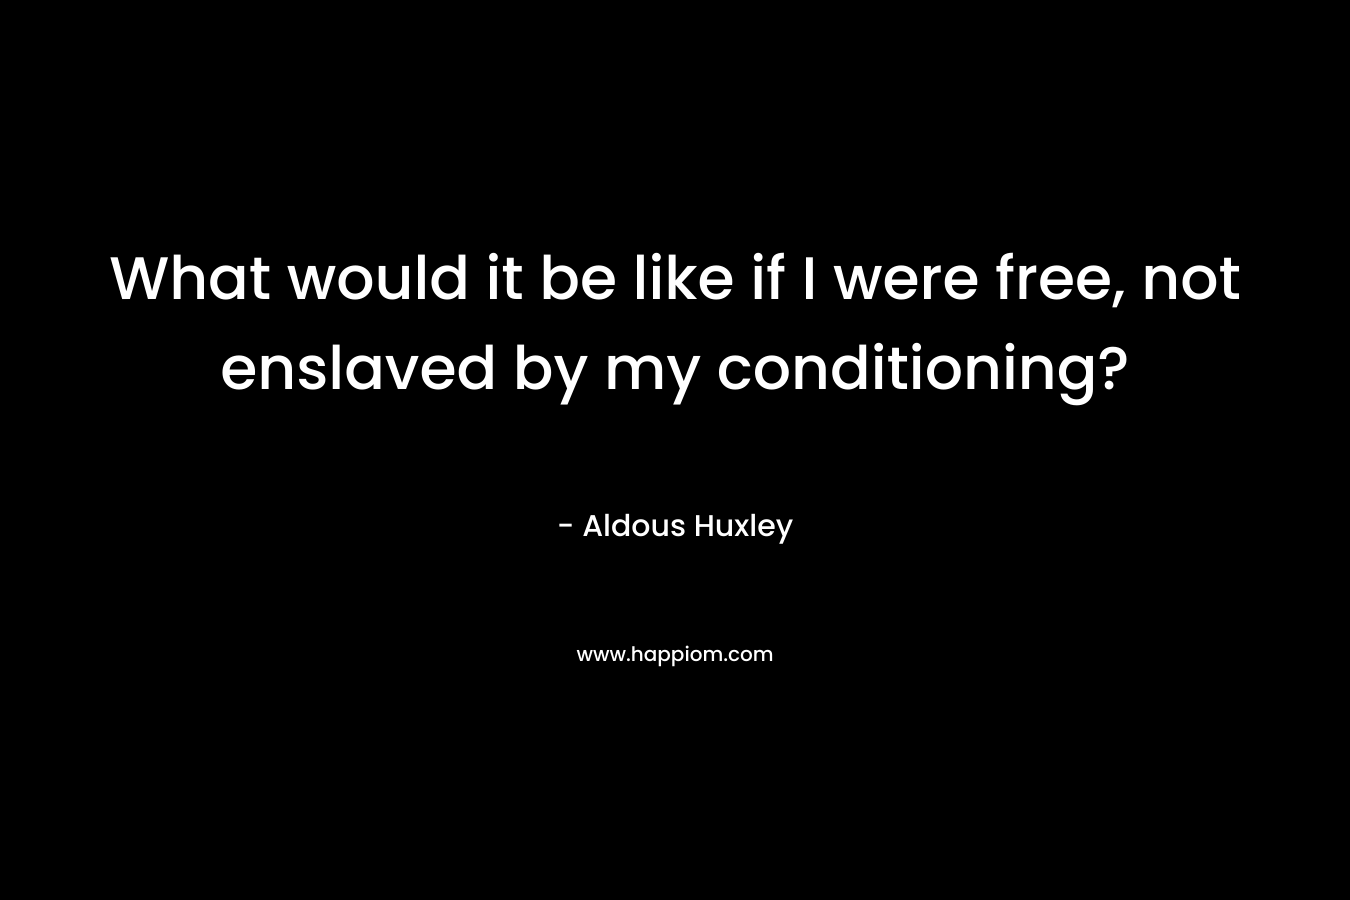 What would it be like if I were free, not enslaved by my conditioning?